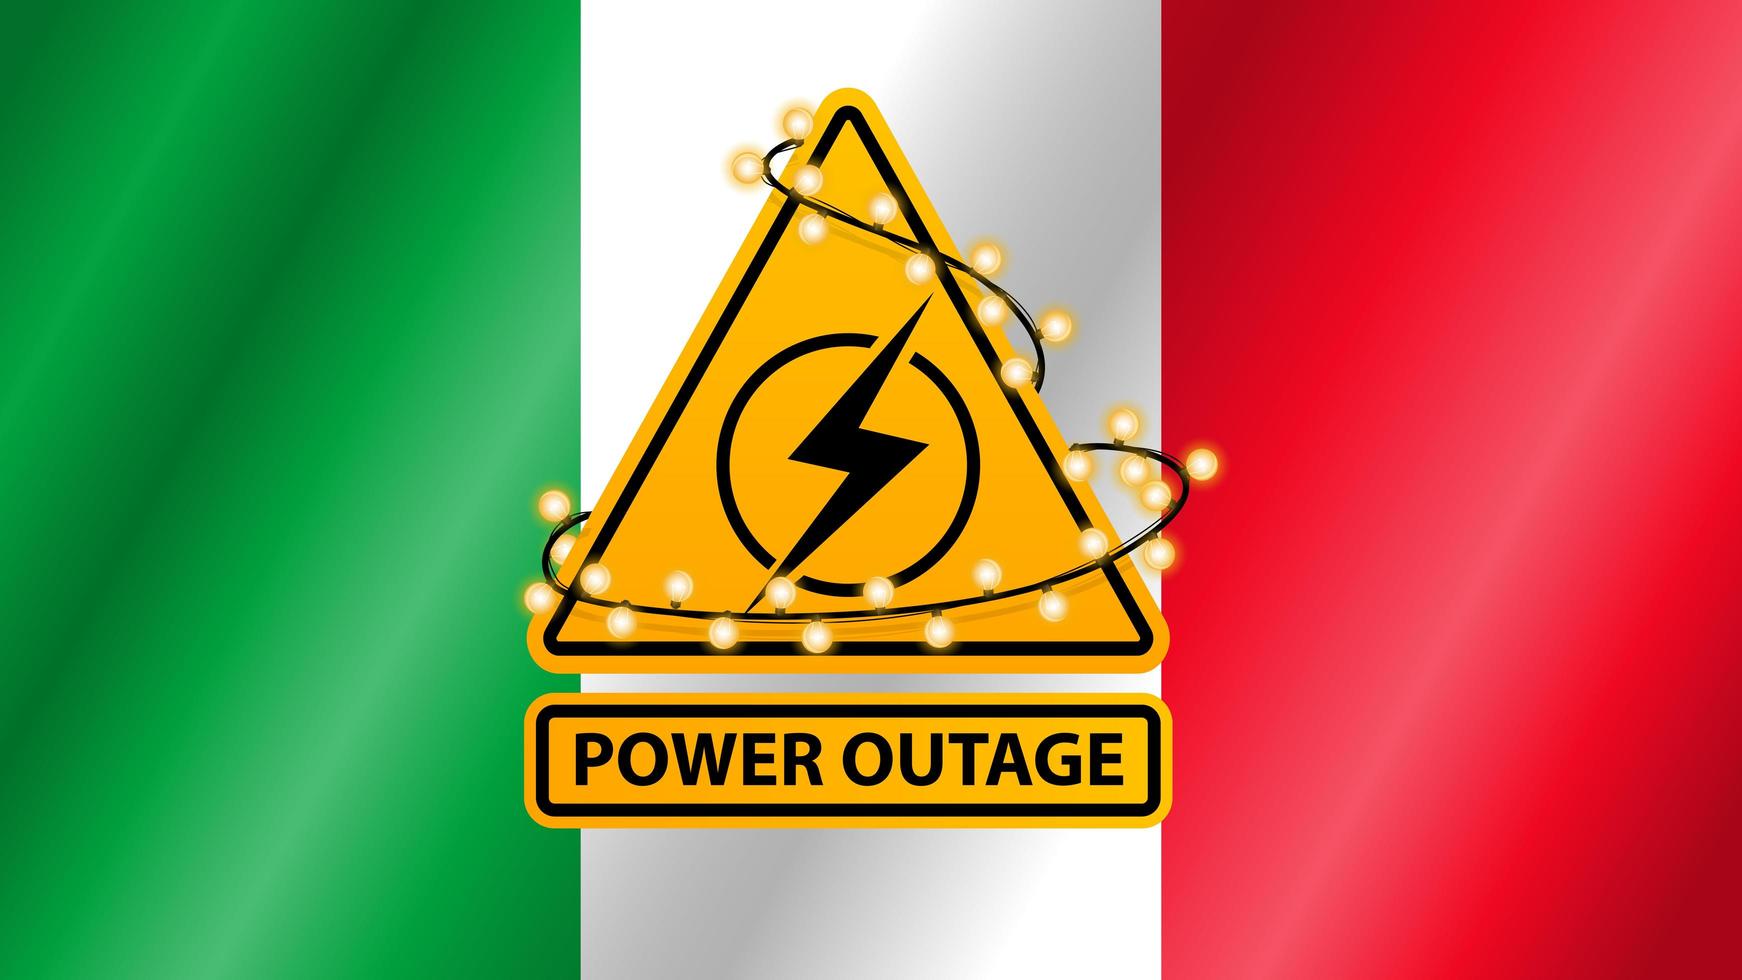 Power outage, yellow warning sign wrapped with garland on the background of the flag of Italy vector